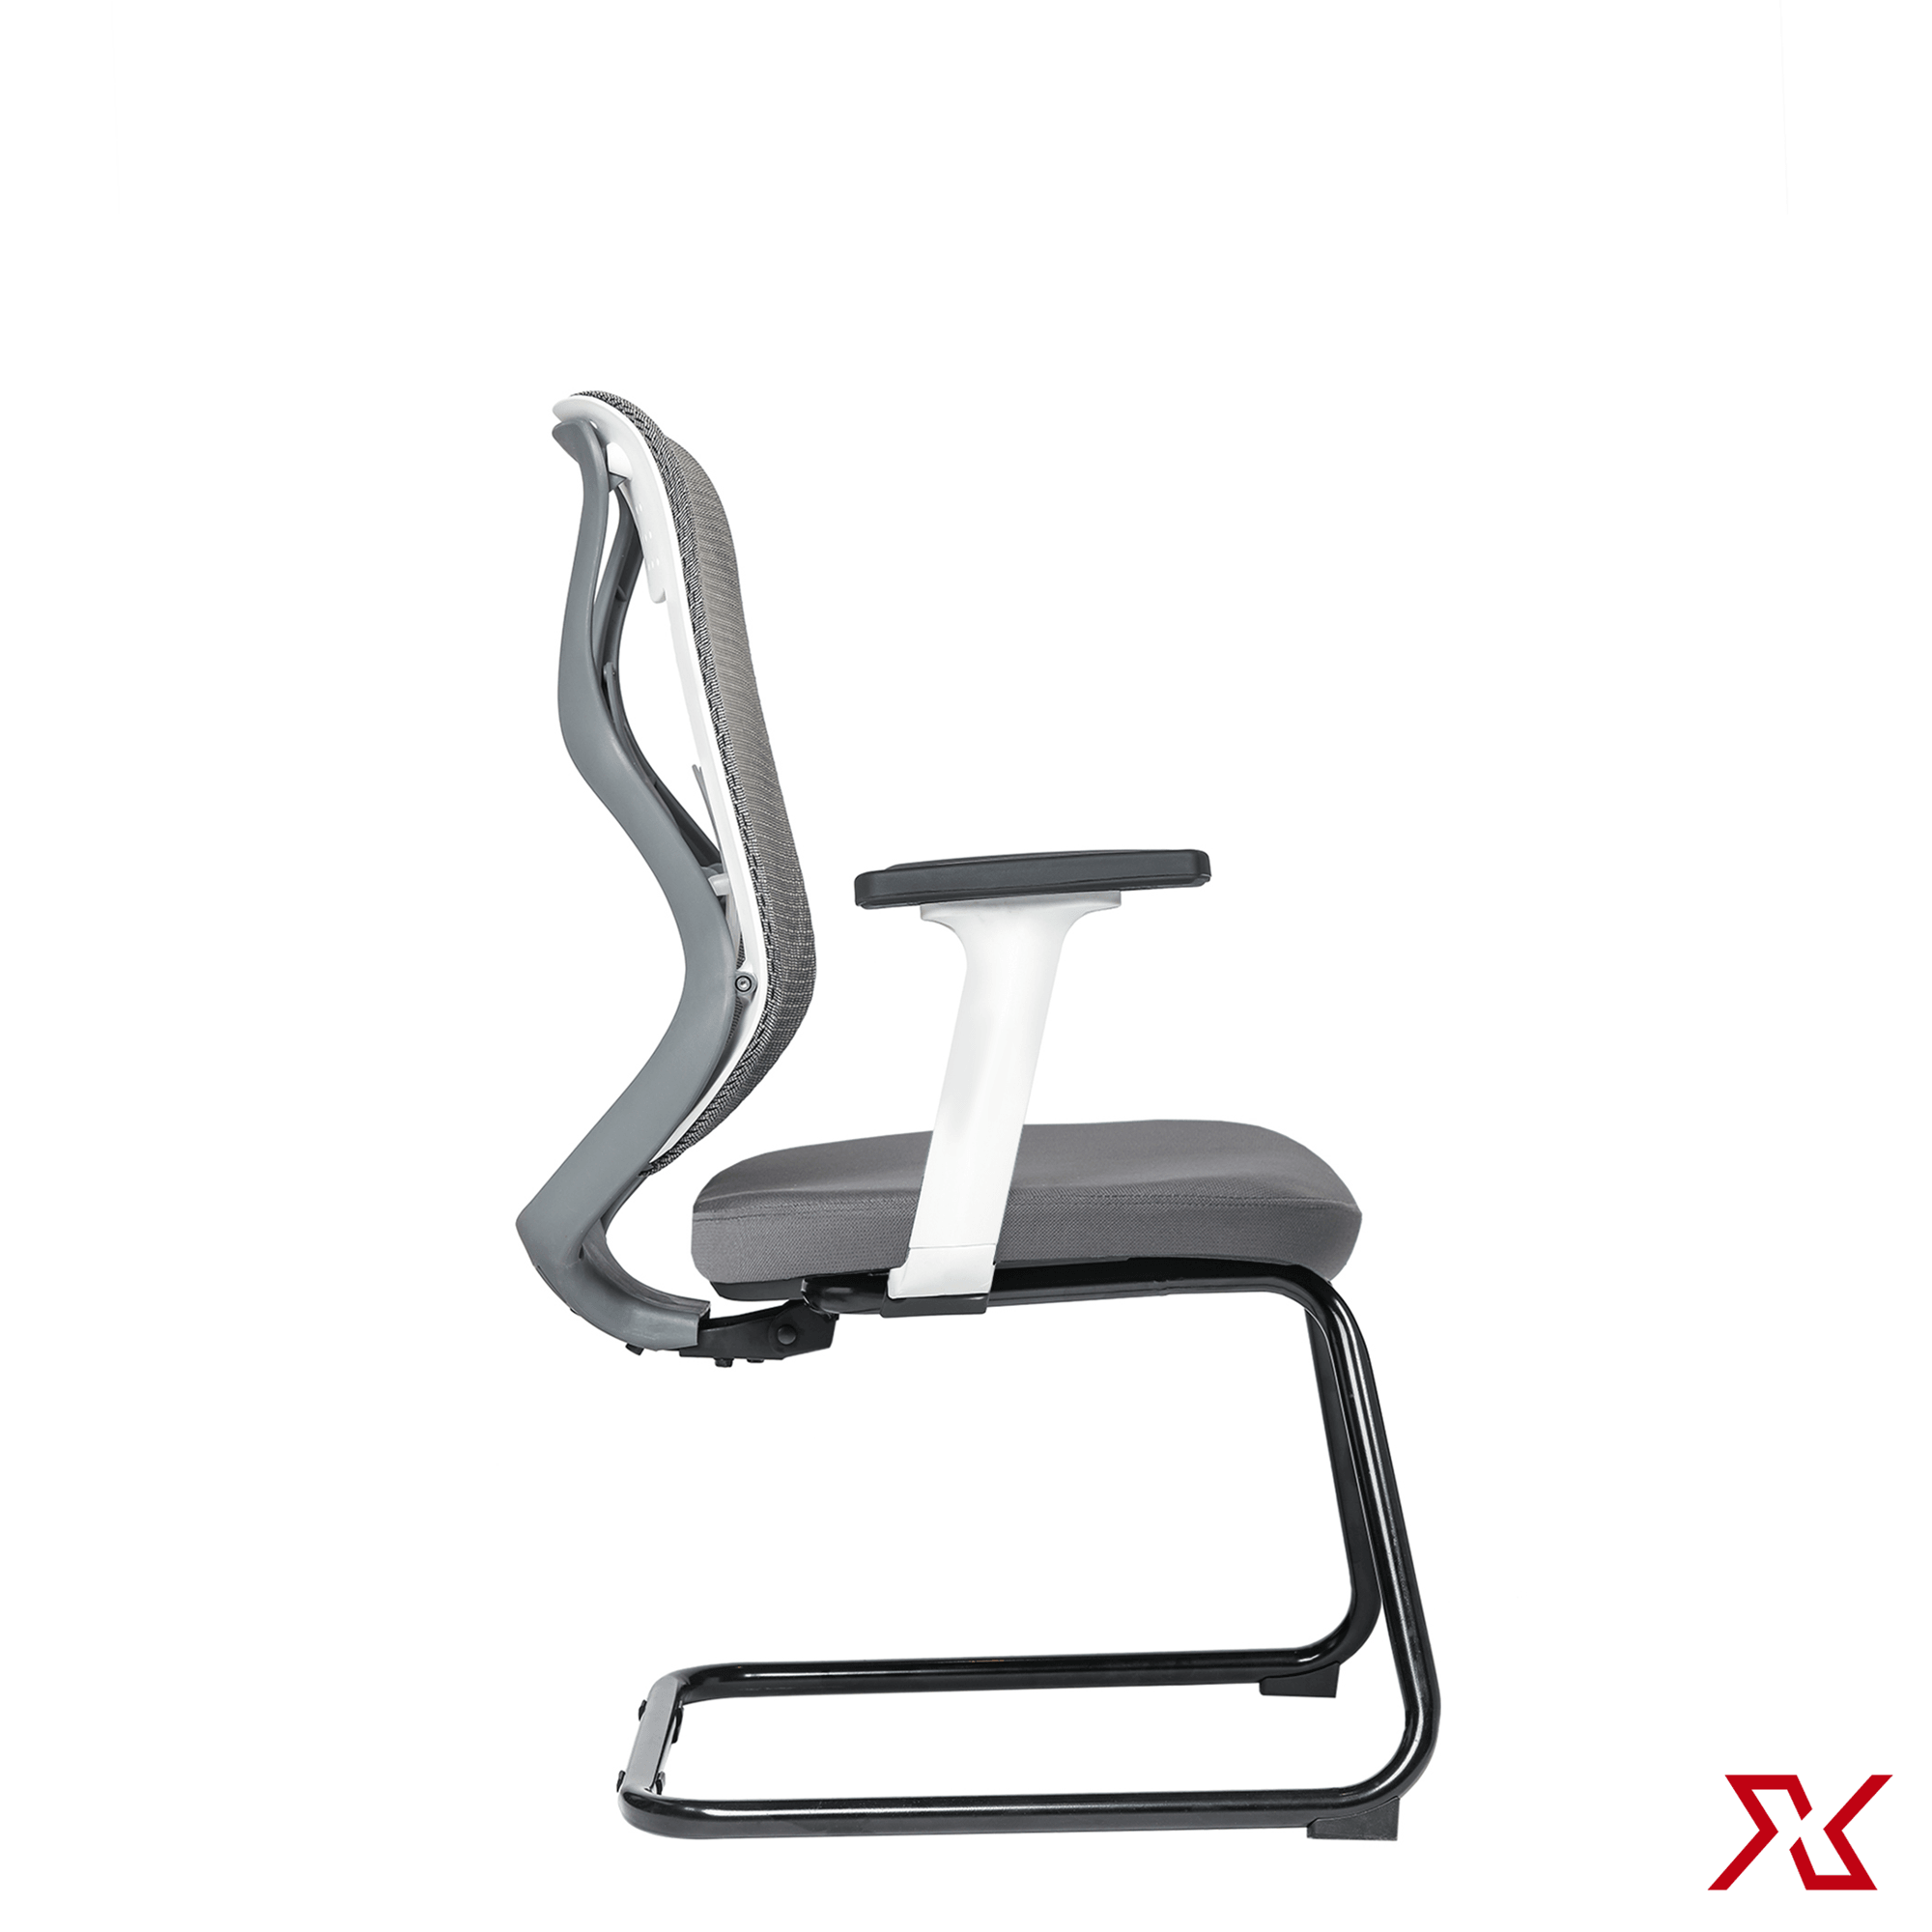 ZEN Visitor (Grey Chair) - Exclusiff Seating Sytems